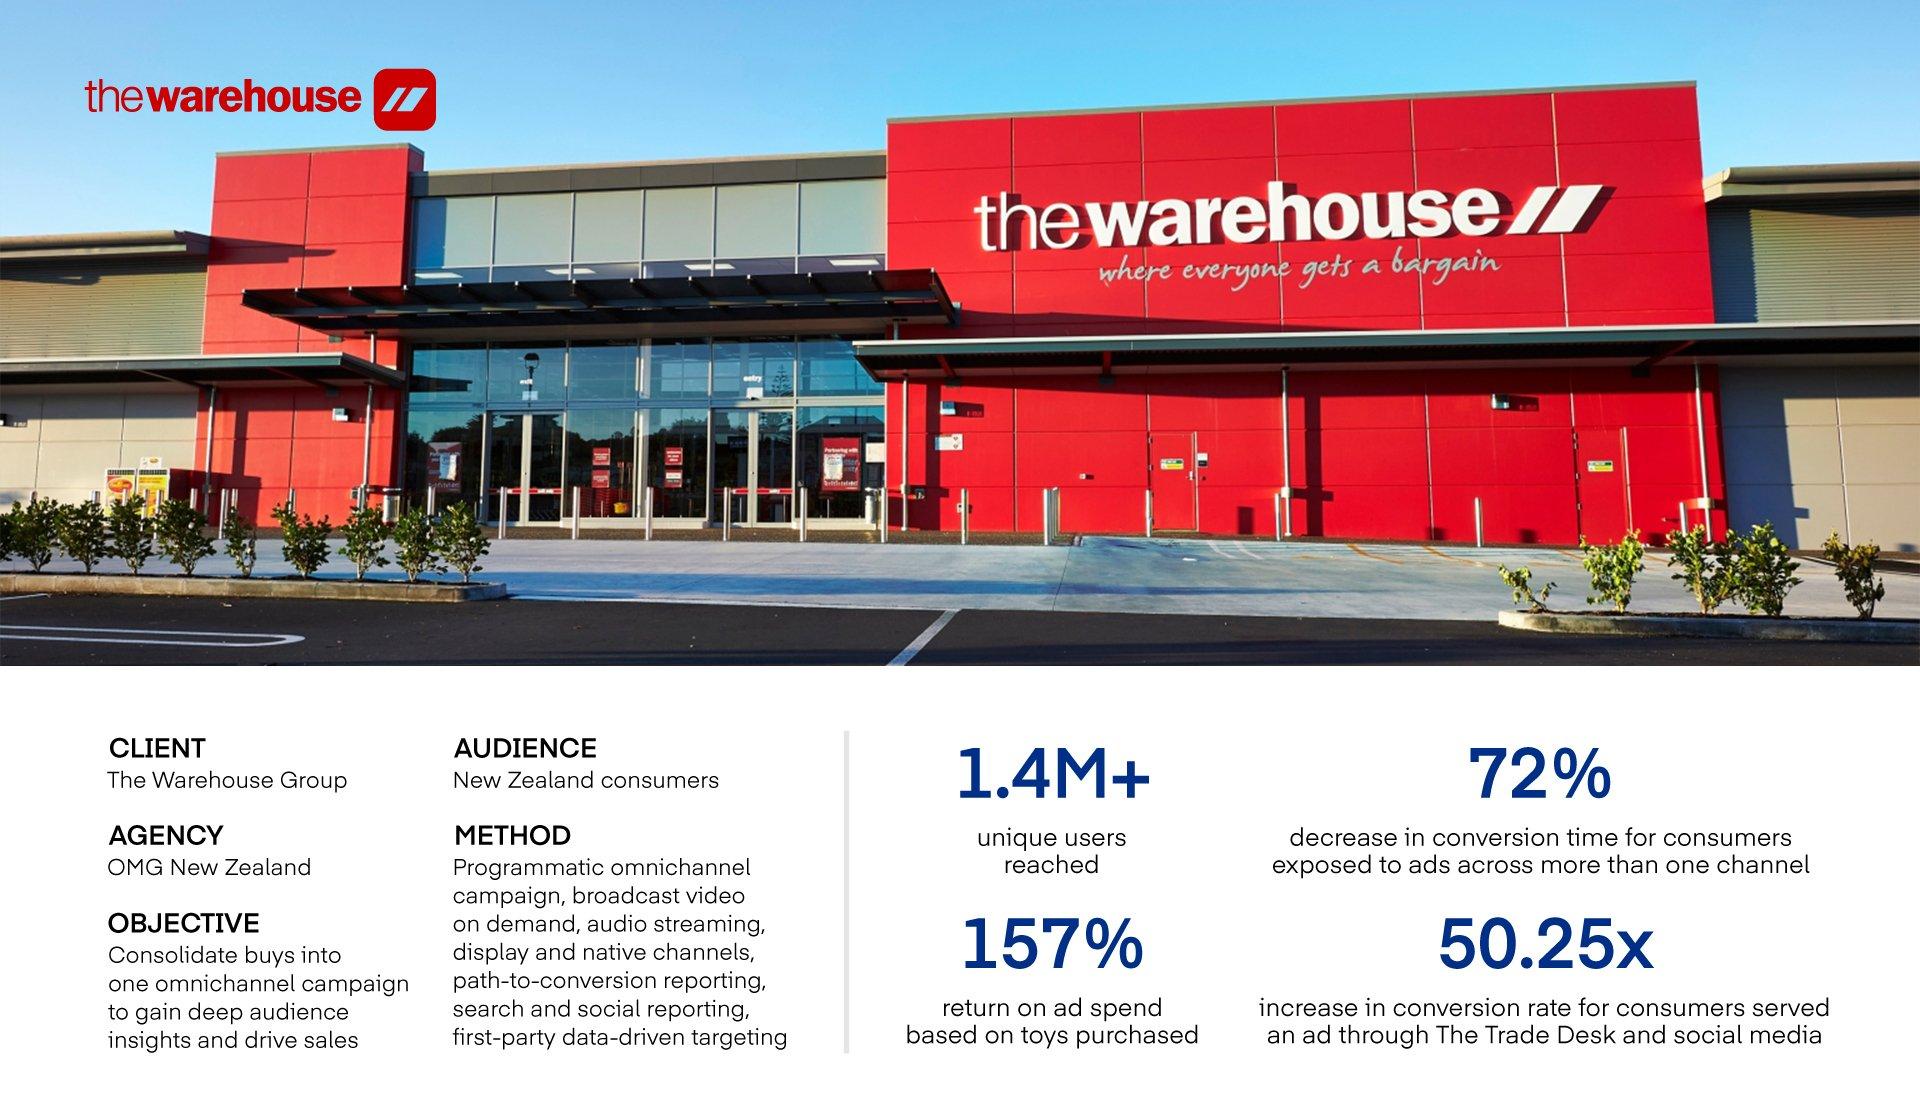 The Warehouse Group + The Trade Desk case study results